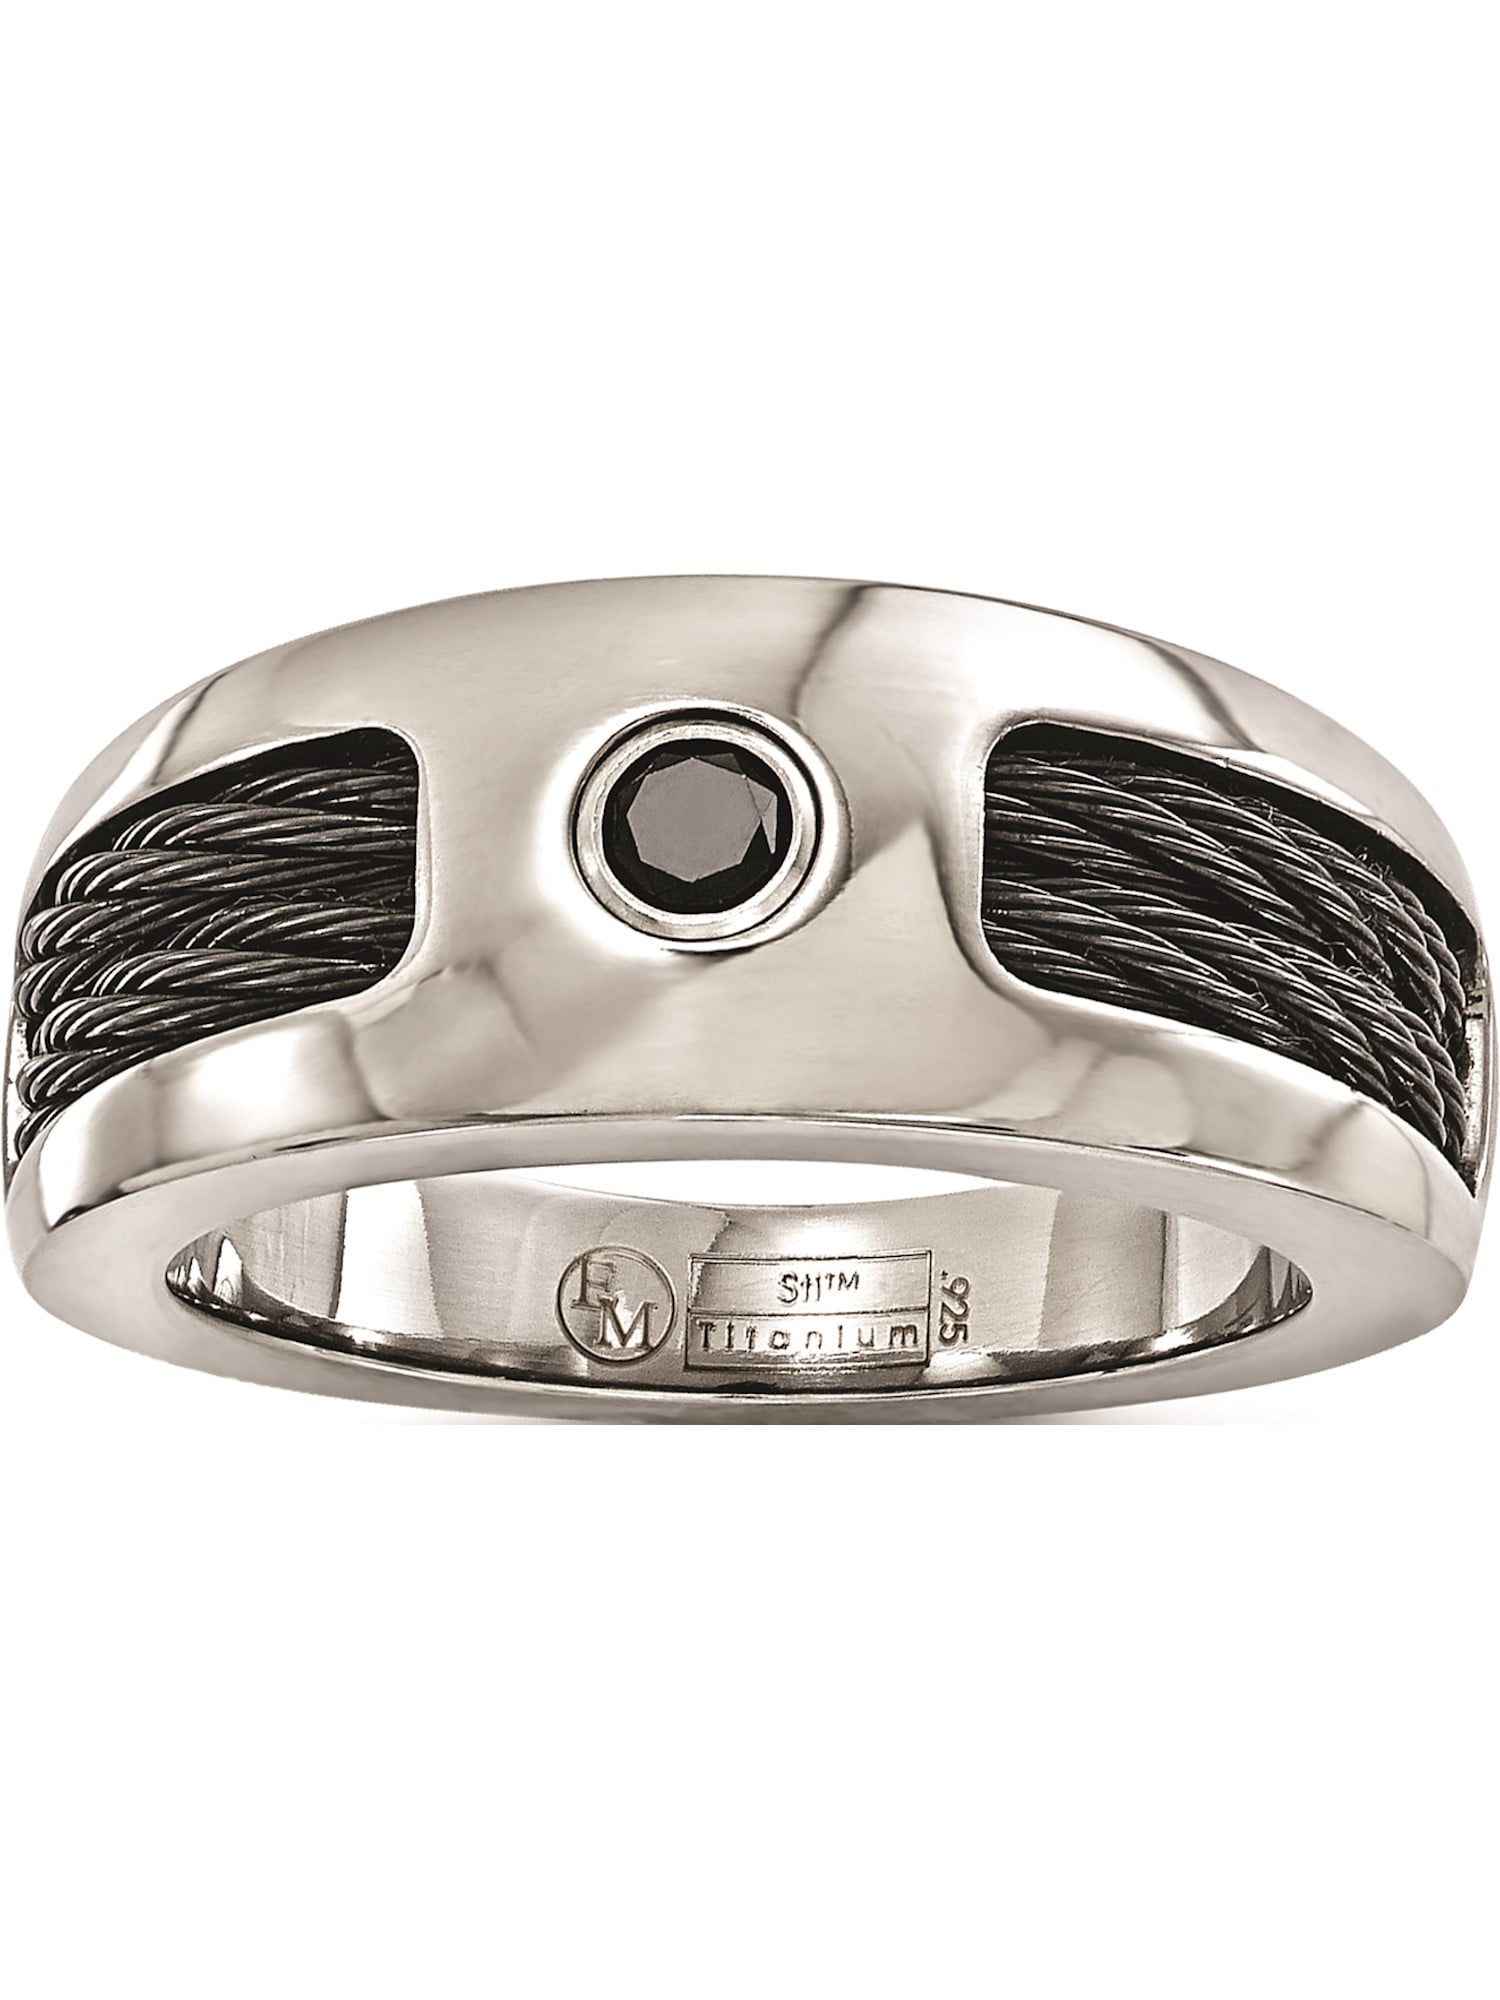 Details about  / Edward Mirell 925 Sterling Silver /& Black Titanium Inlay Black Stripe Ring S:10